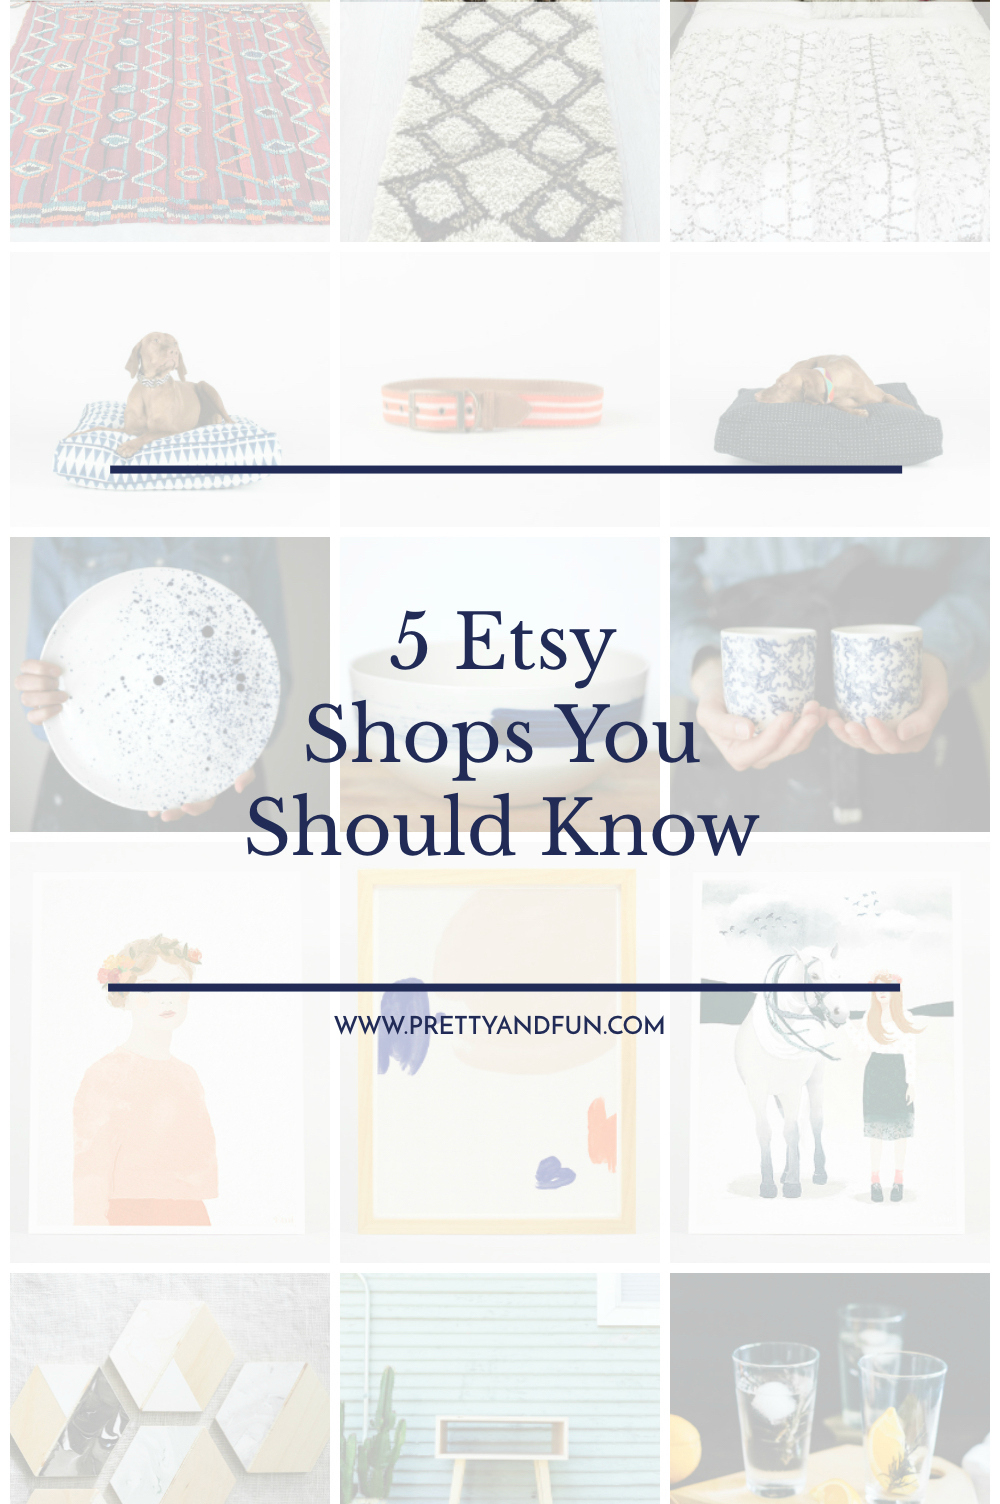 5 New Etsy Shops You Should Know.